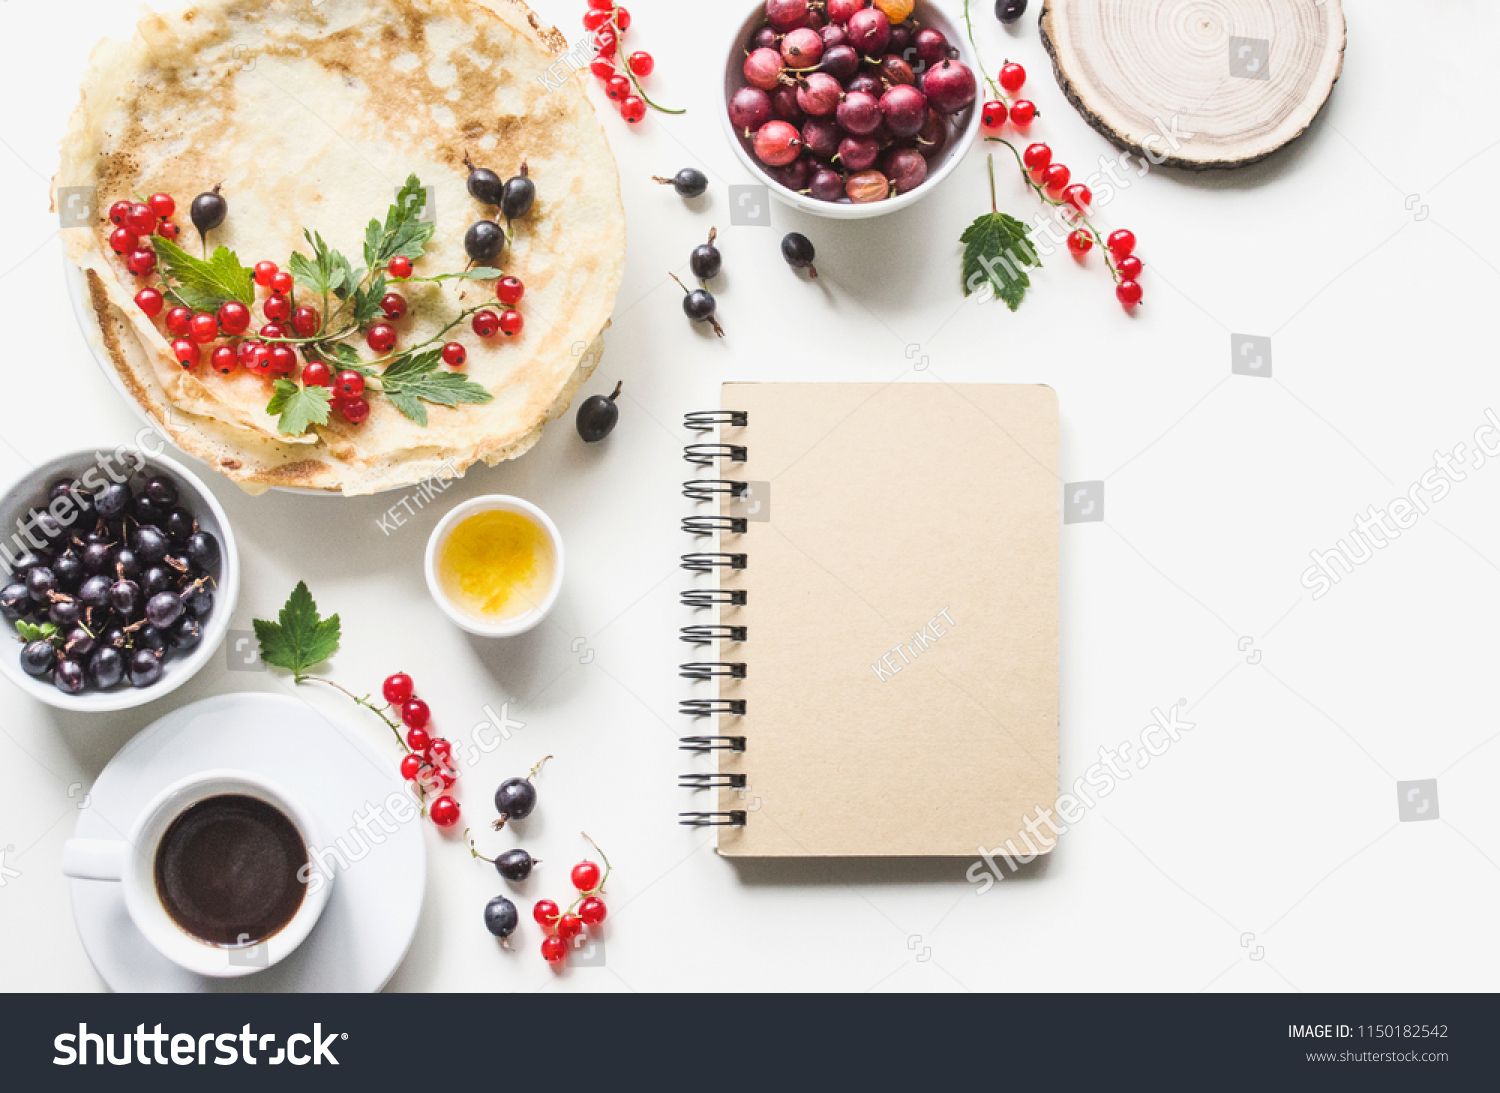 Breakfast from homemade pancakes and coffee with fresh berries of currants and gooseberries. With notepad recipe.  Flat lay, top view, copy space,  mock-up
 #1150182542